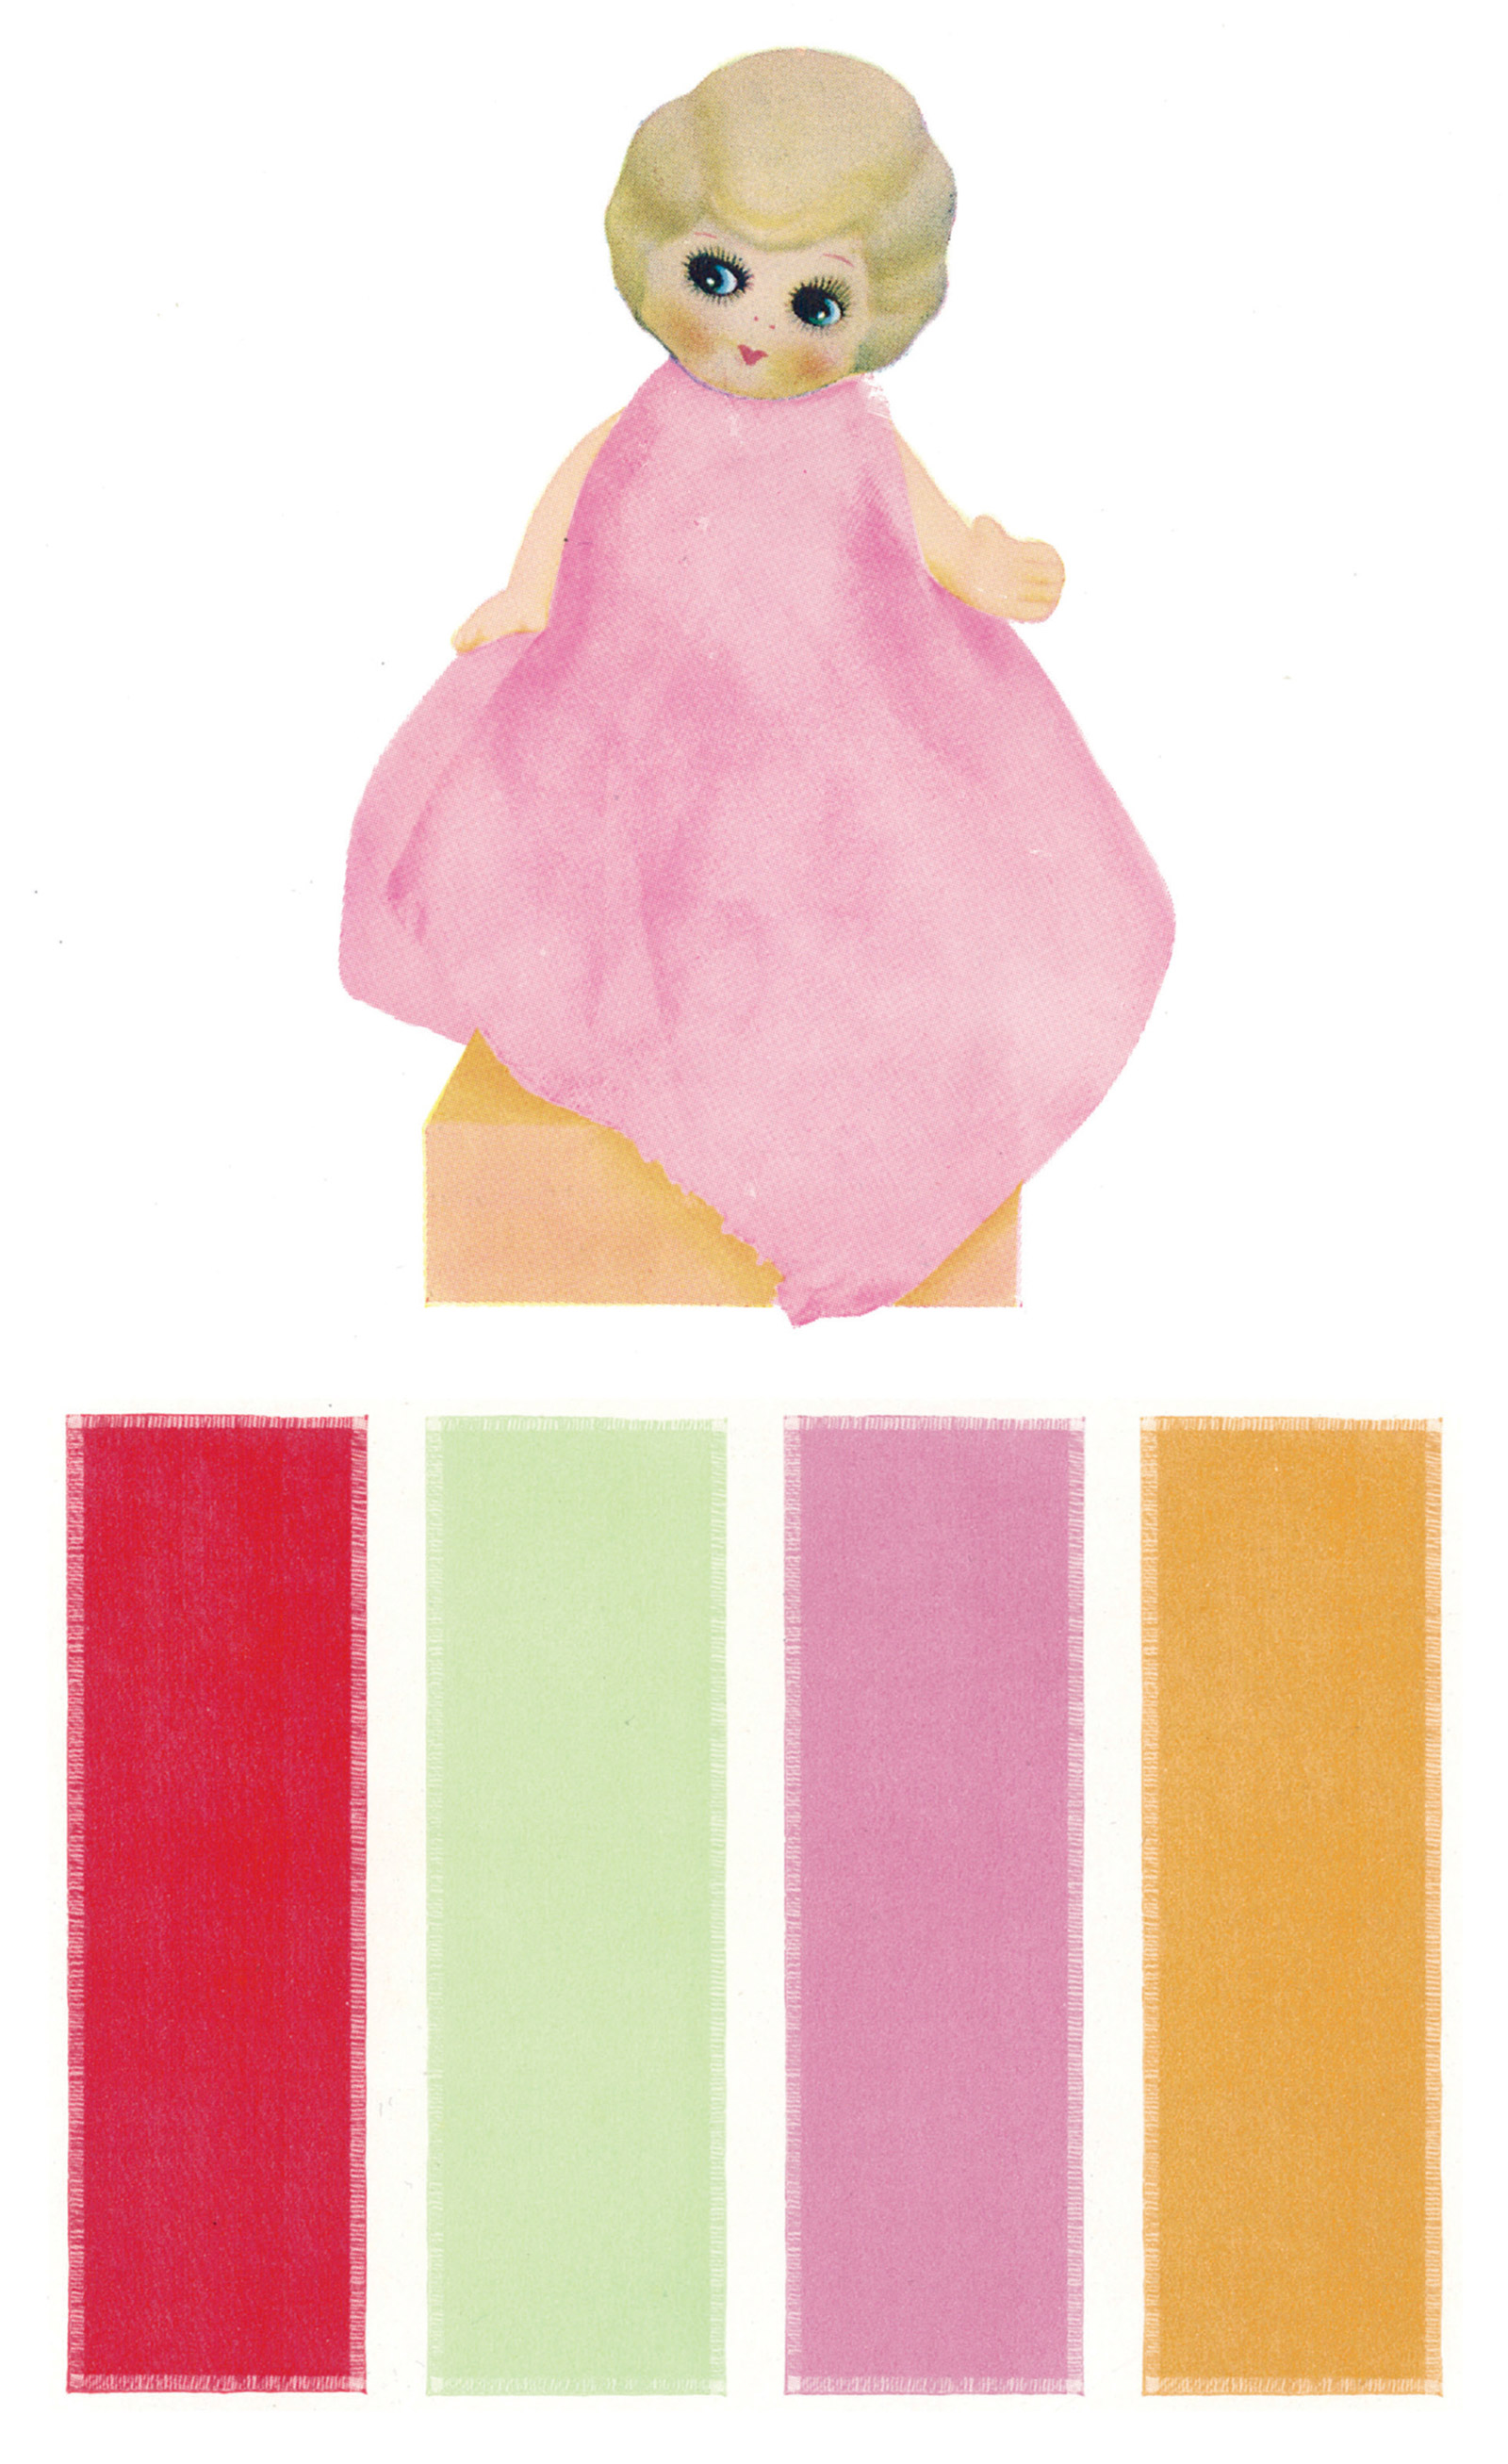 Eileen Jackson Williams’s test for color harmony sensitivity in young children. The test consists of a doll in a pink dress and scarves of various colors which children must match to the doll’s clothing.